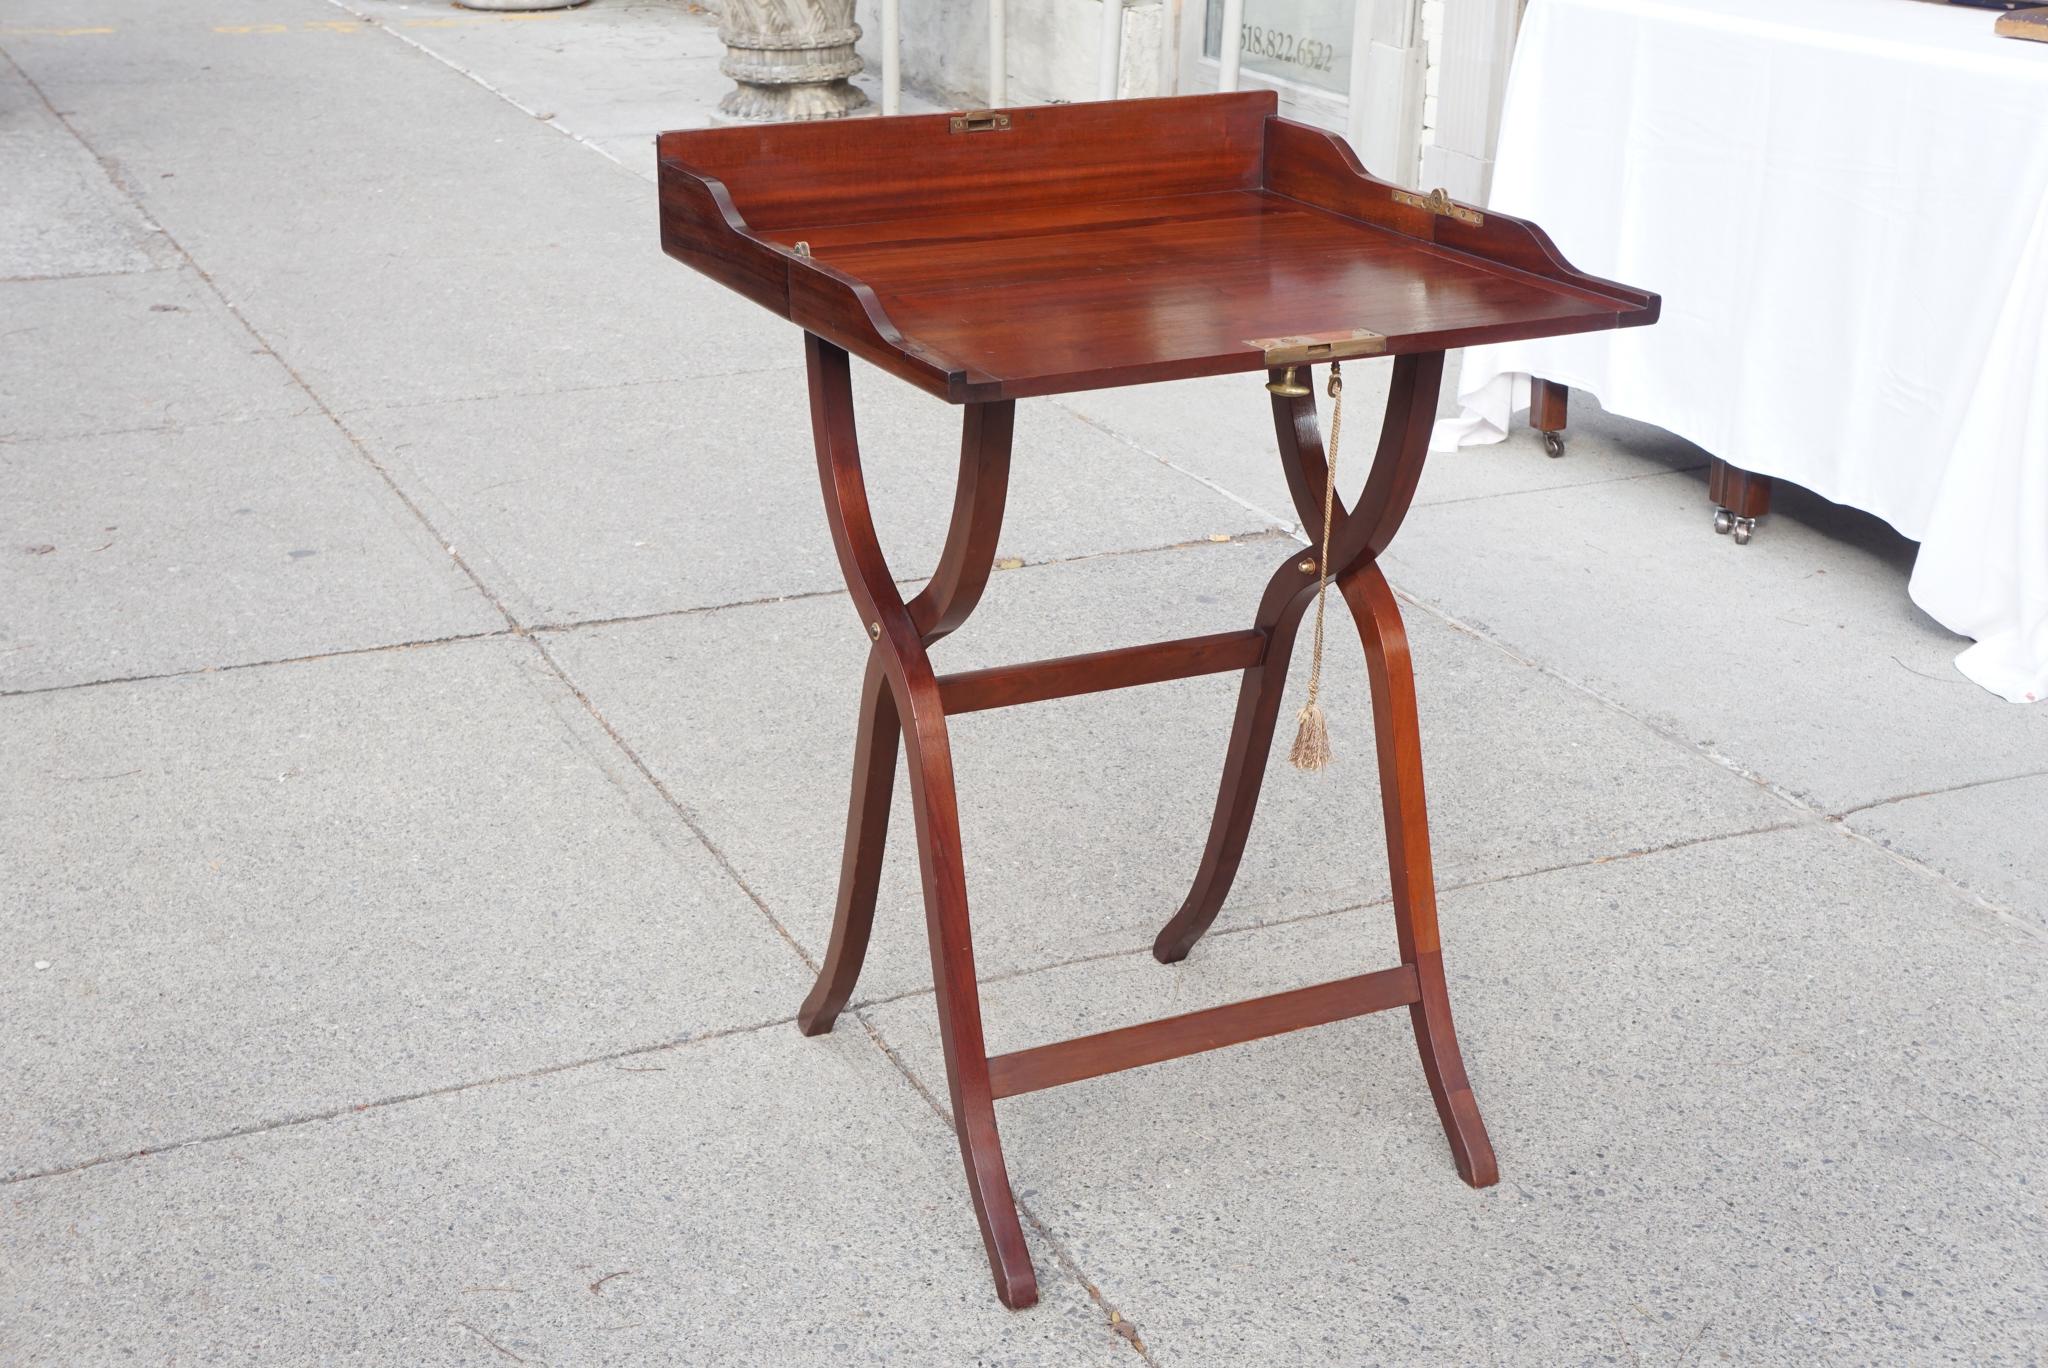 This fine period Edwardian folding camp desk is made of mahogany and some selection of nicely figured boards has occurred. The desk is of a typical form and is structurally sound being designed to house and contain materials while in transit from